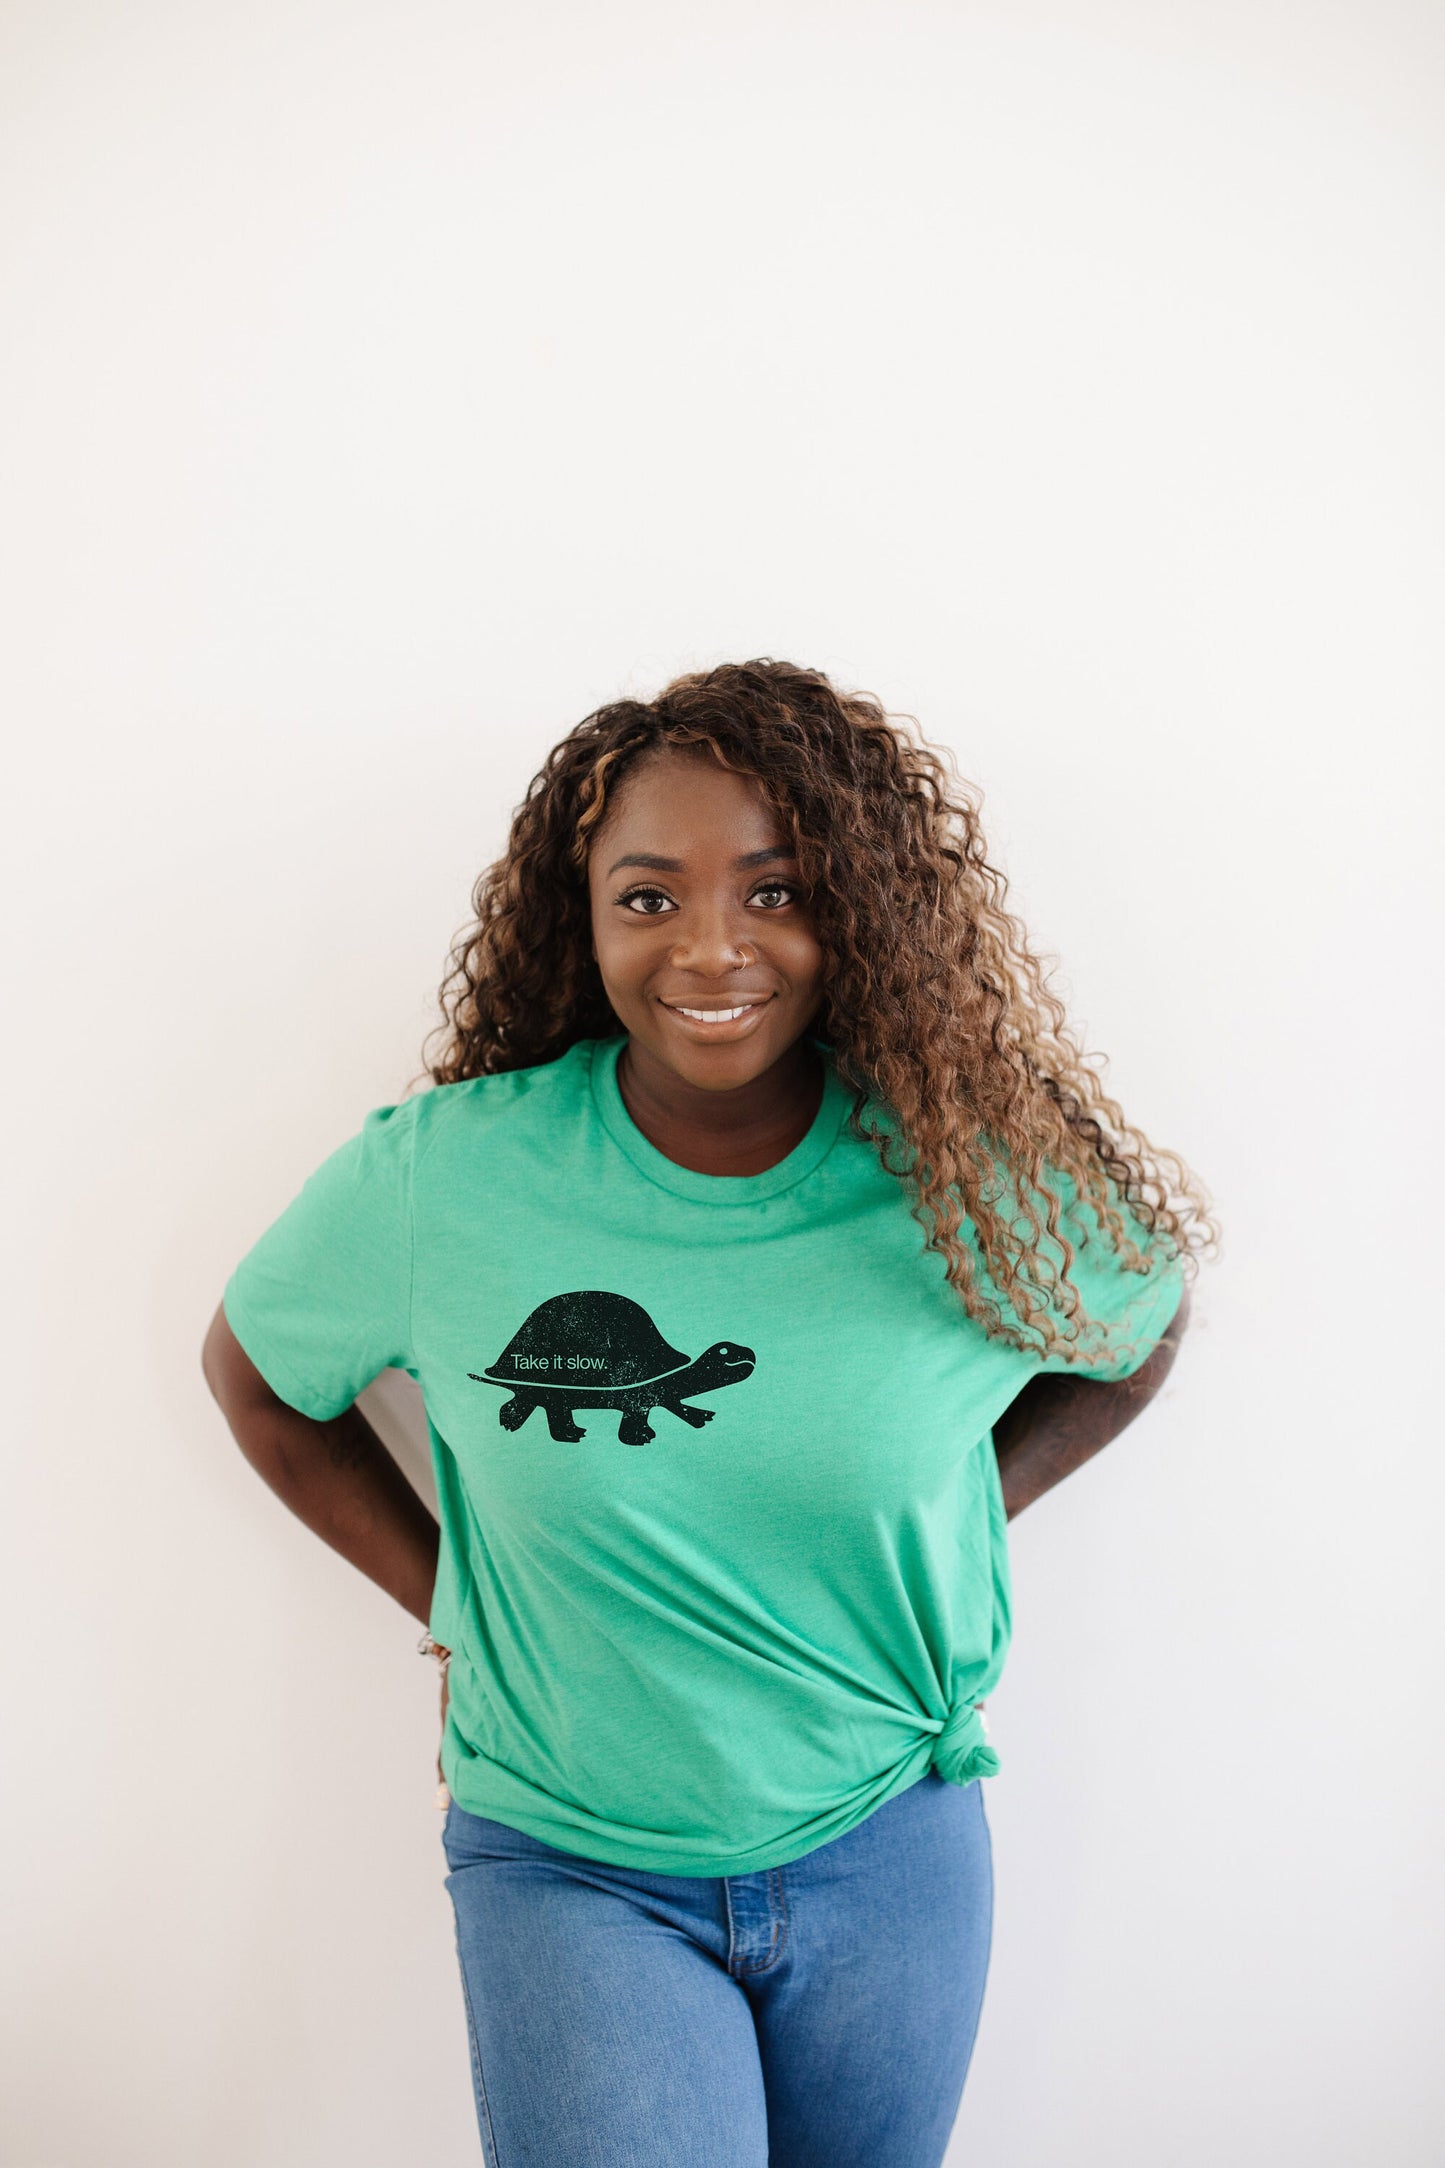 Take It Slow Perfect Turtle Lovers Ultra Soft Graphic Tee Unisex Soft Tee T-shirt for Women or Men